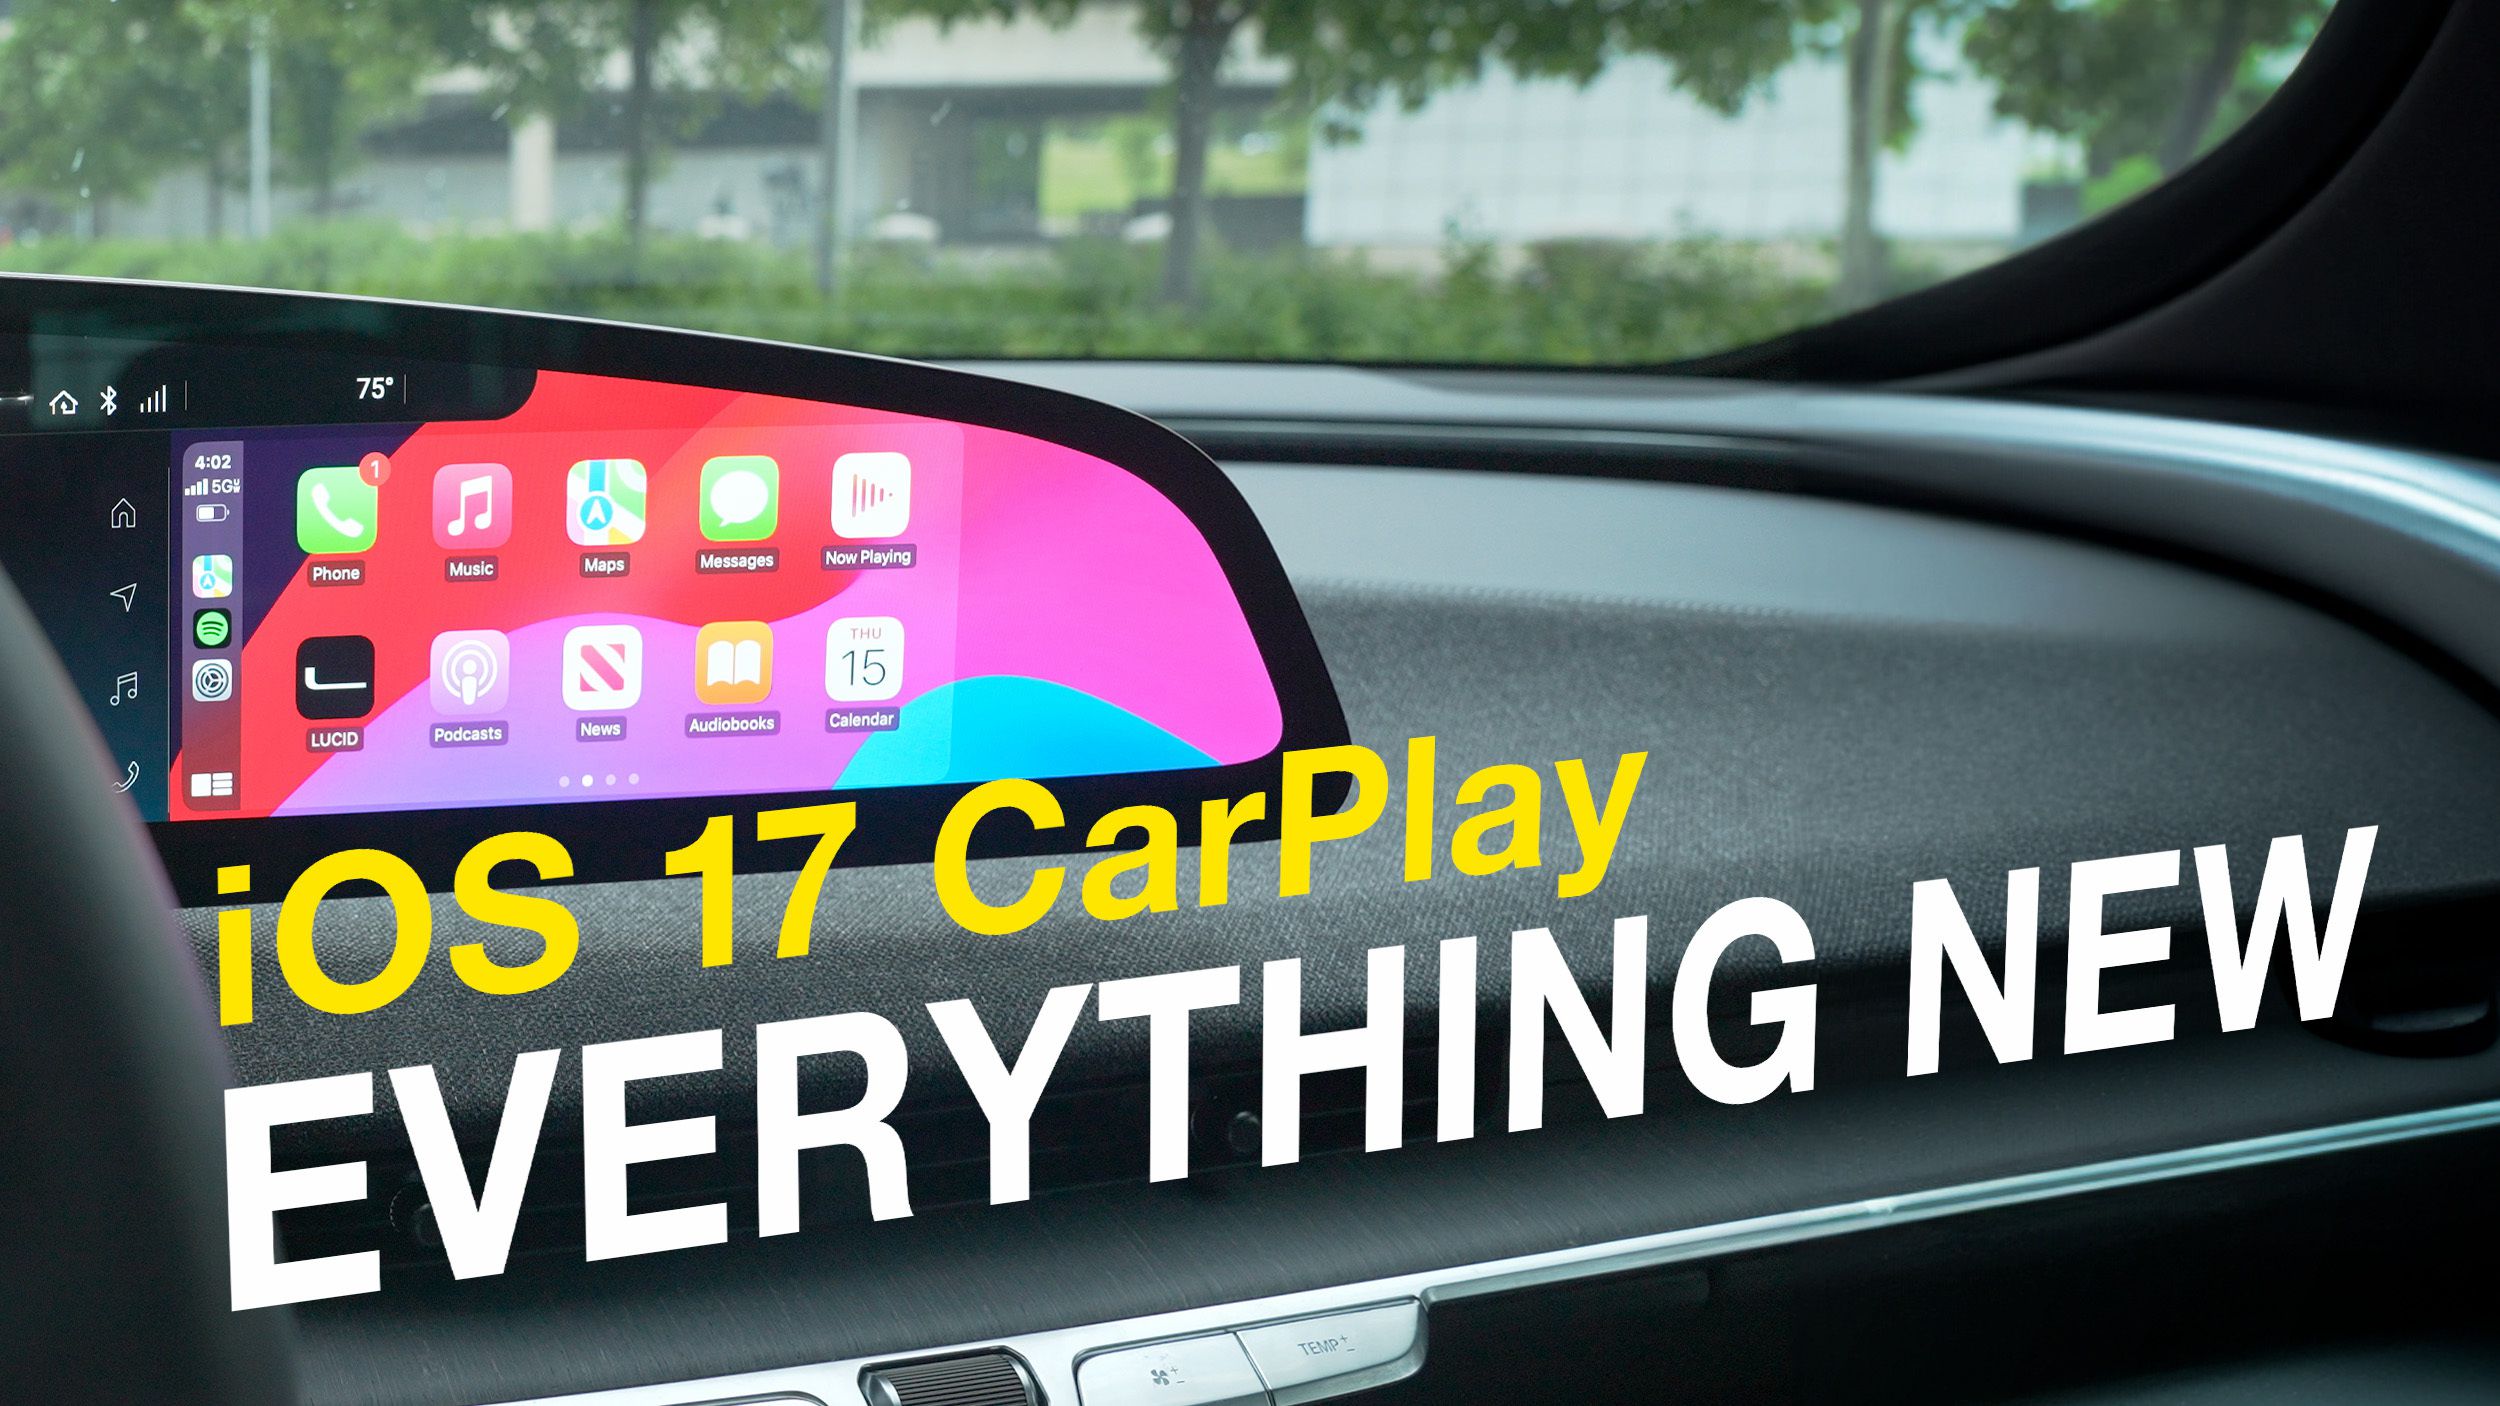 What’s new with CarPlay in iOS 17